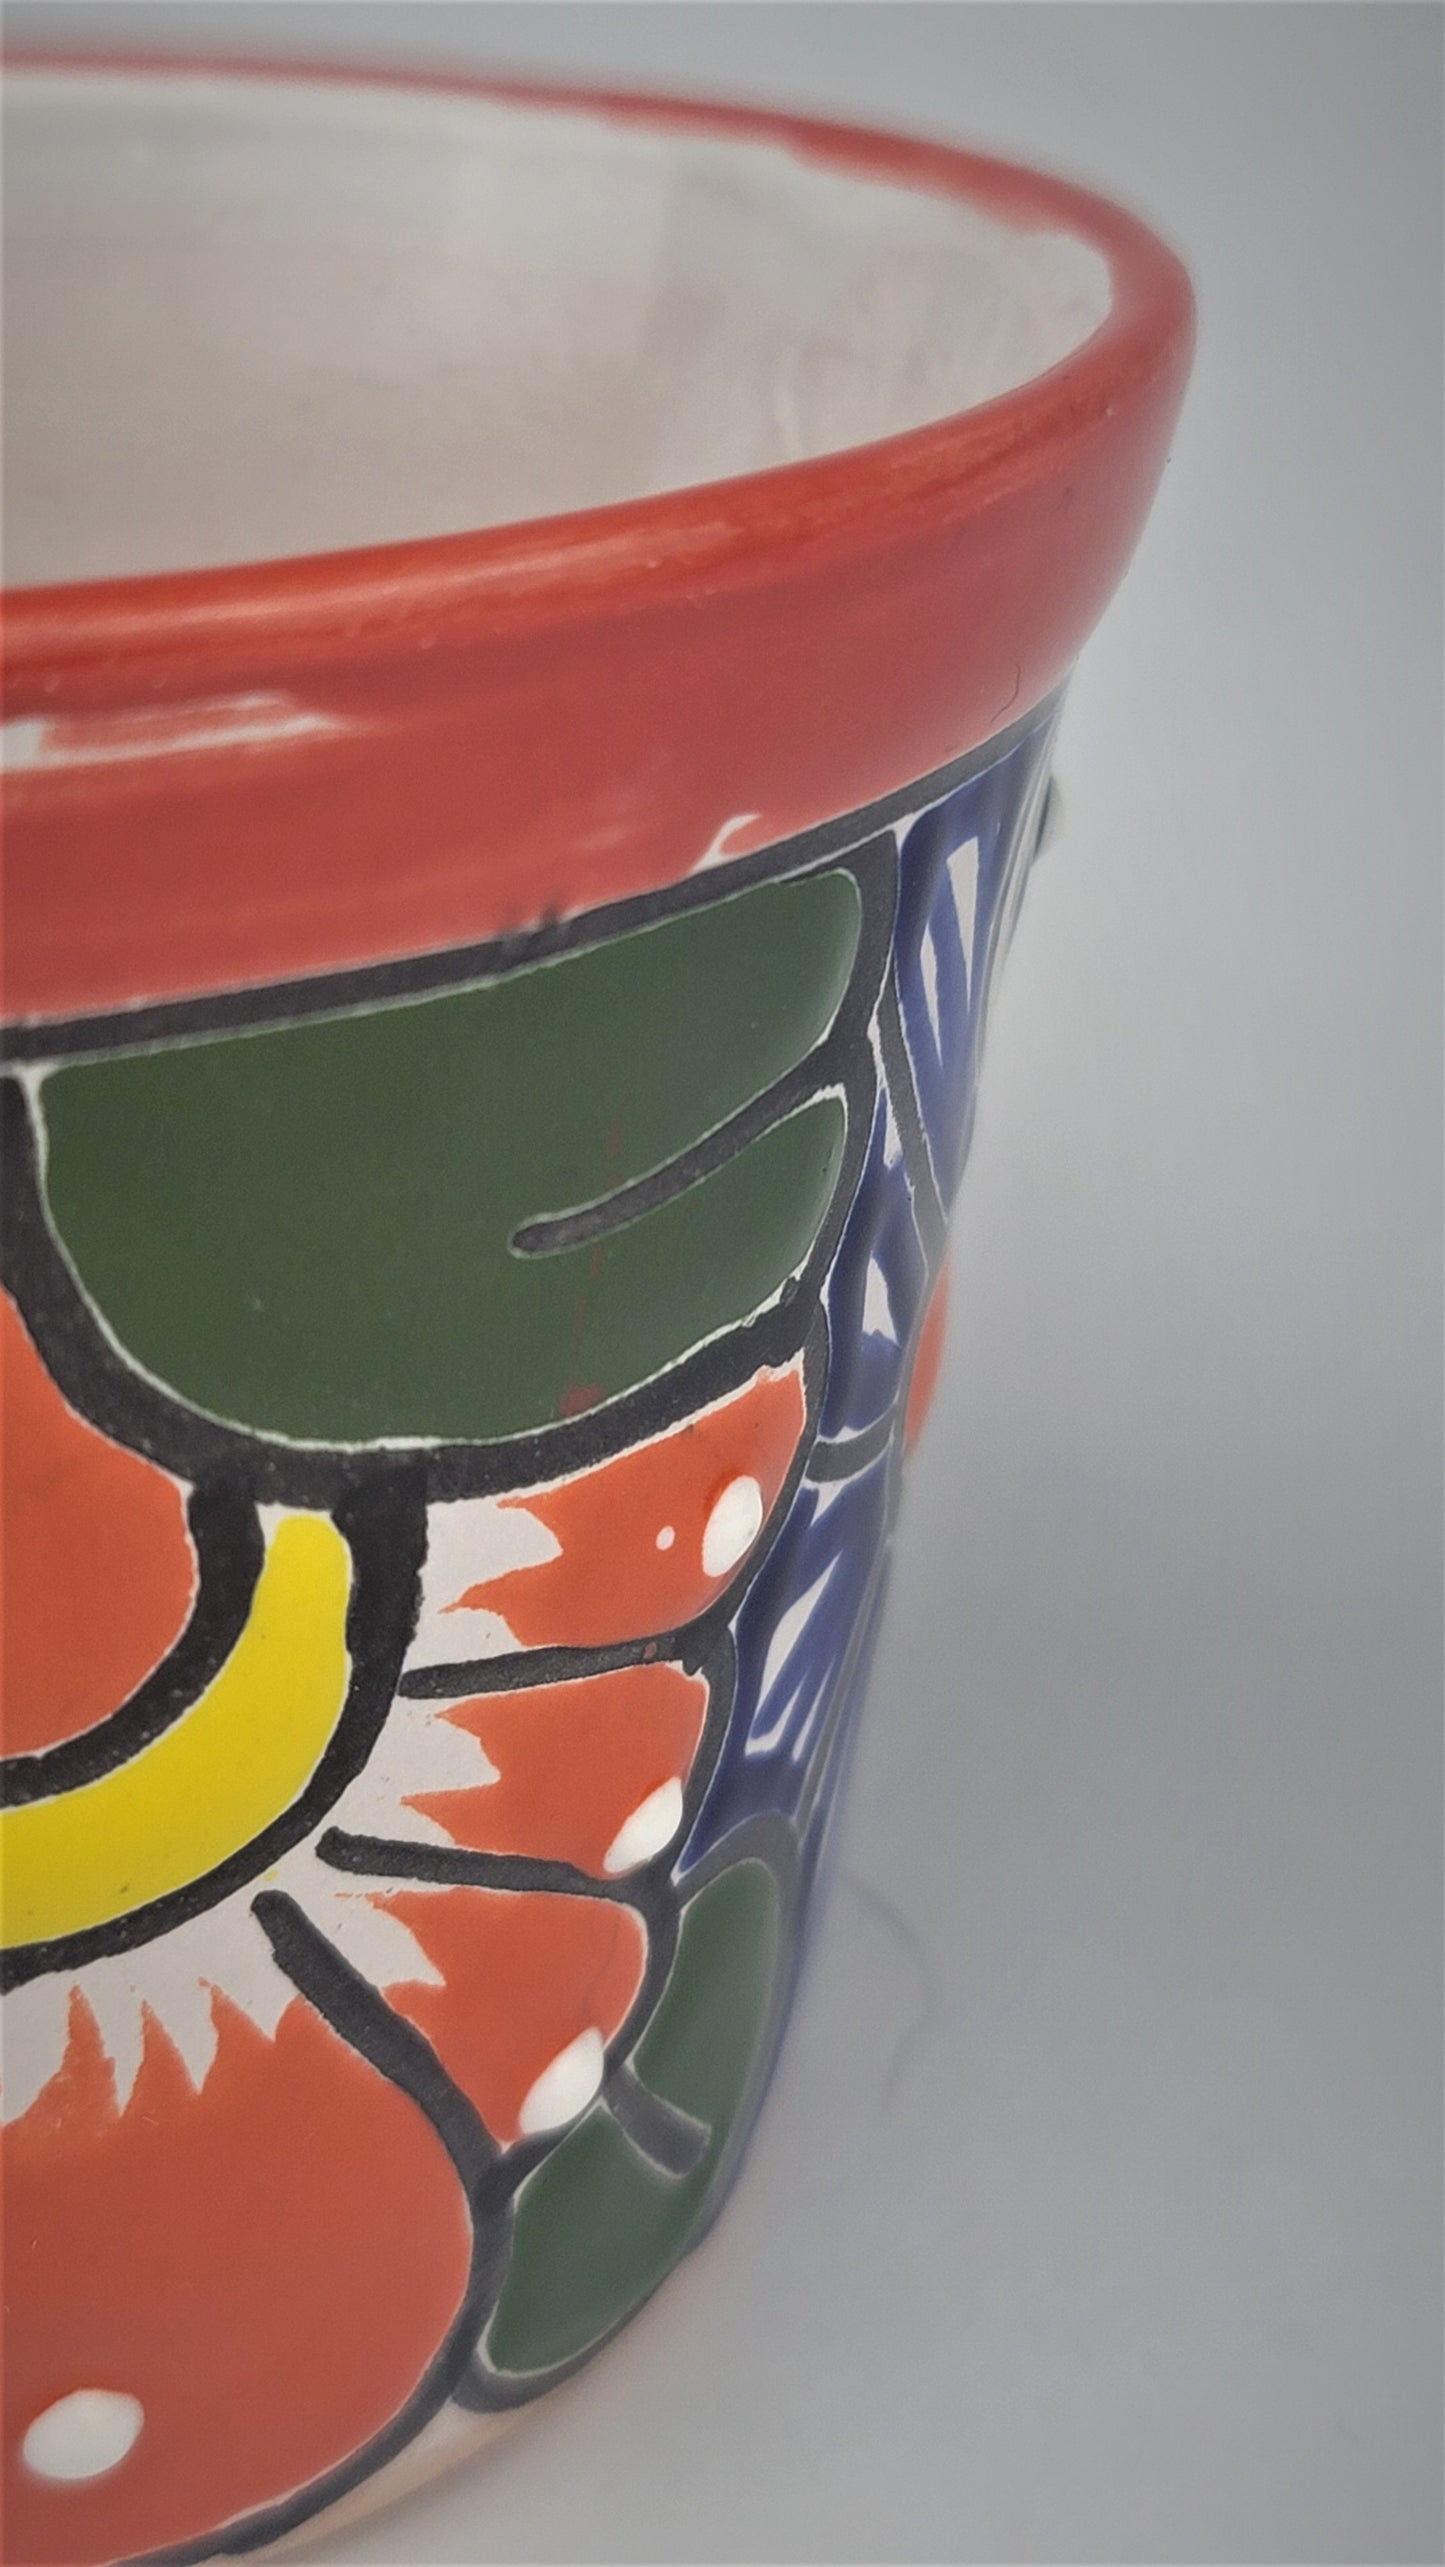 Mexico Pottery Talavera Hand-Painted Flower Pot 5" Red